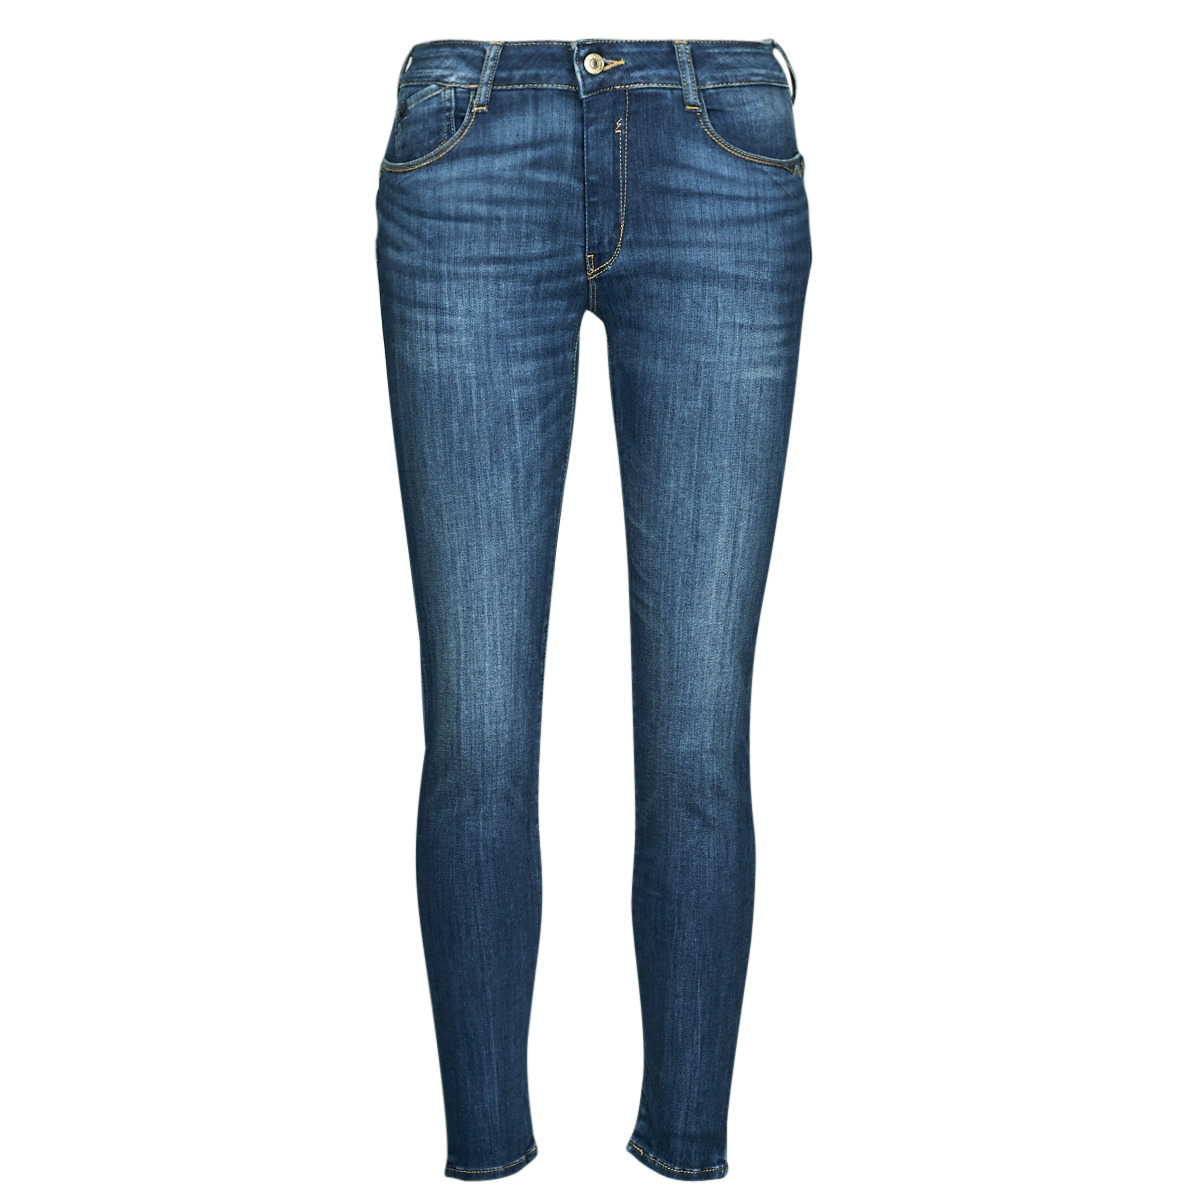 Spartoo Women's Skinny Jeans in Blue by Le Temps des Cerises GOOFASH